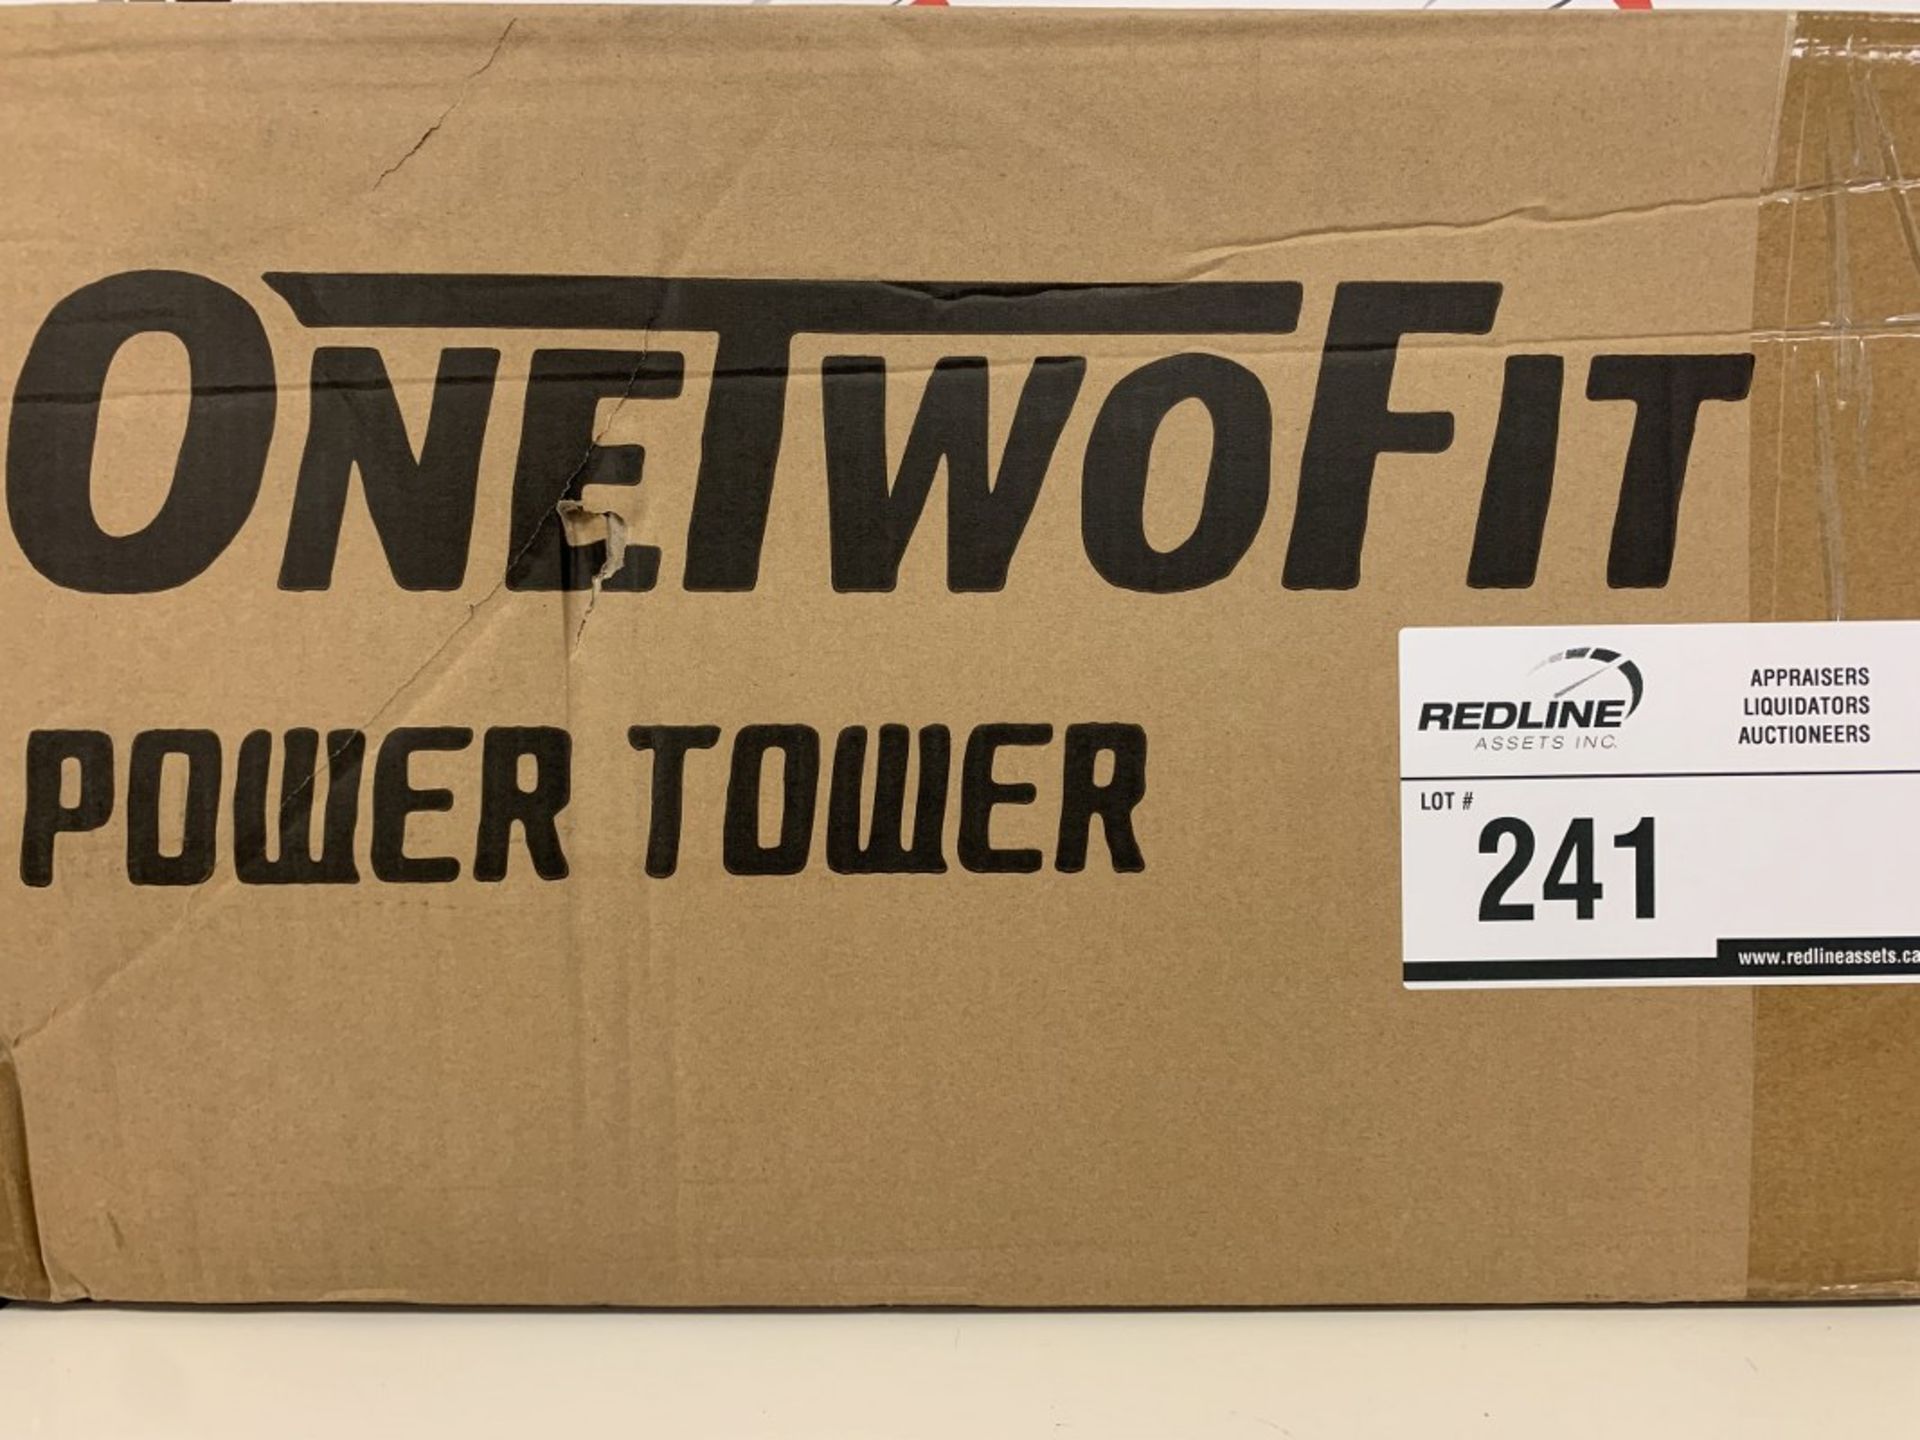 Onetwofit - Power Tool - Image 3 of 4